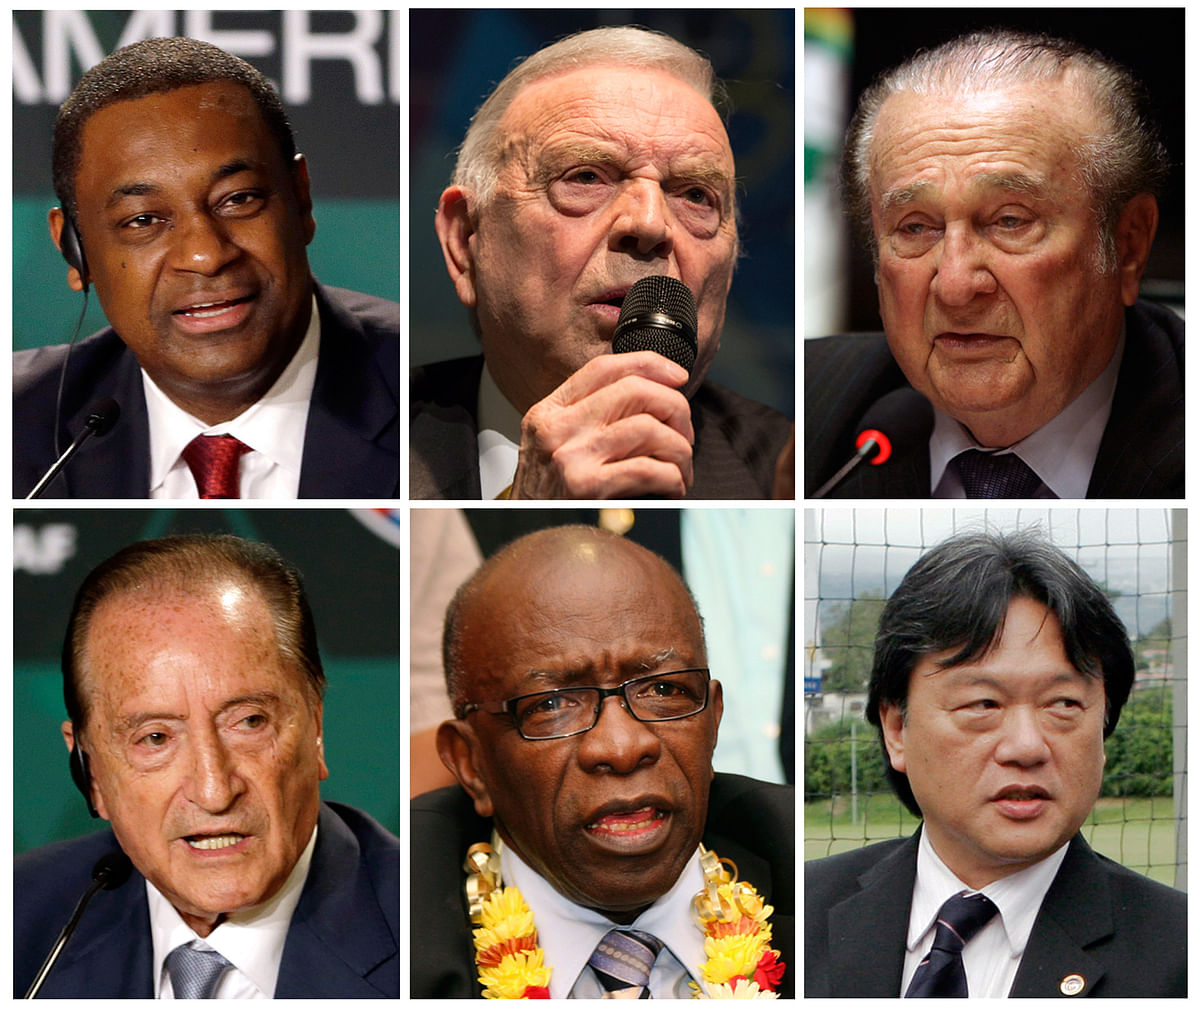 Six soccer officials were arrested in Zurich over over suspected corruption at soccer’s governing body FIFA.